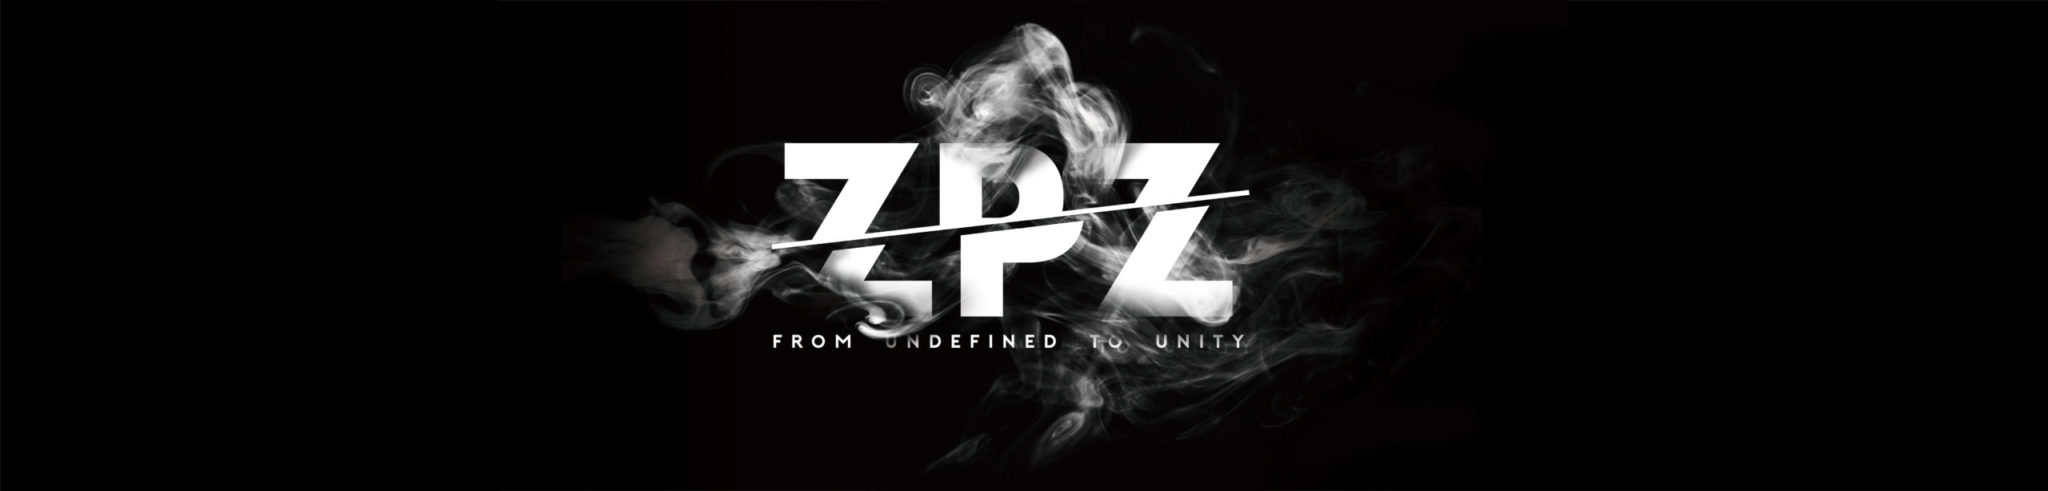 Head banner of ZPZ home page